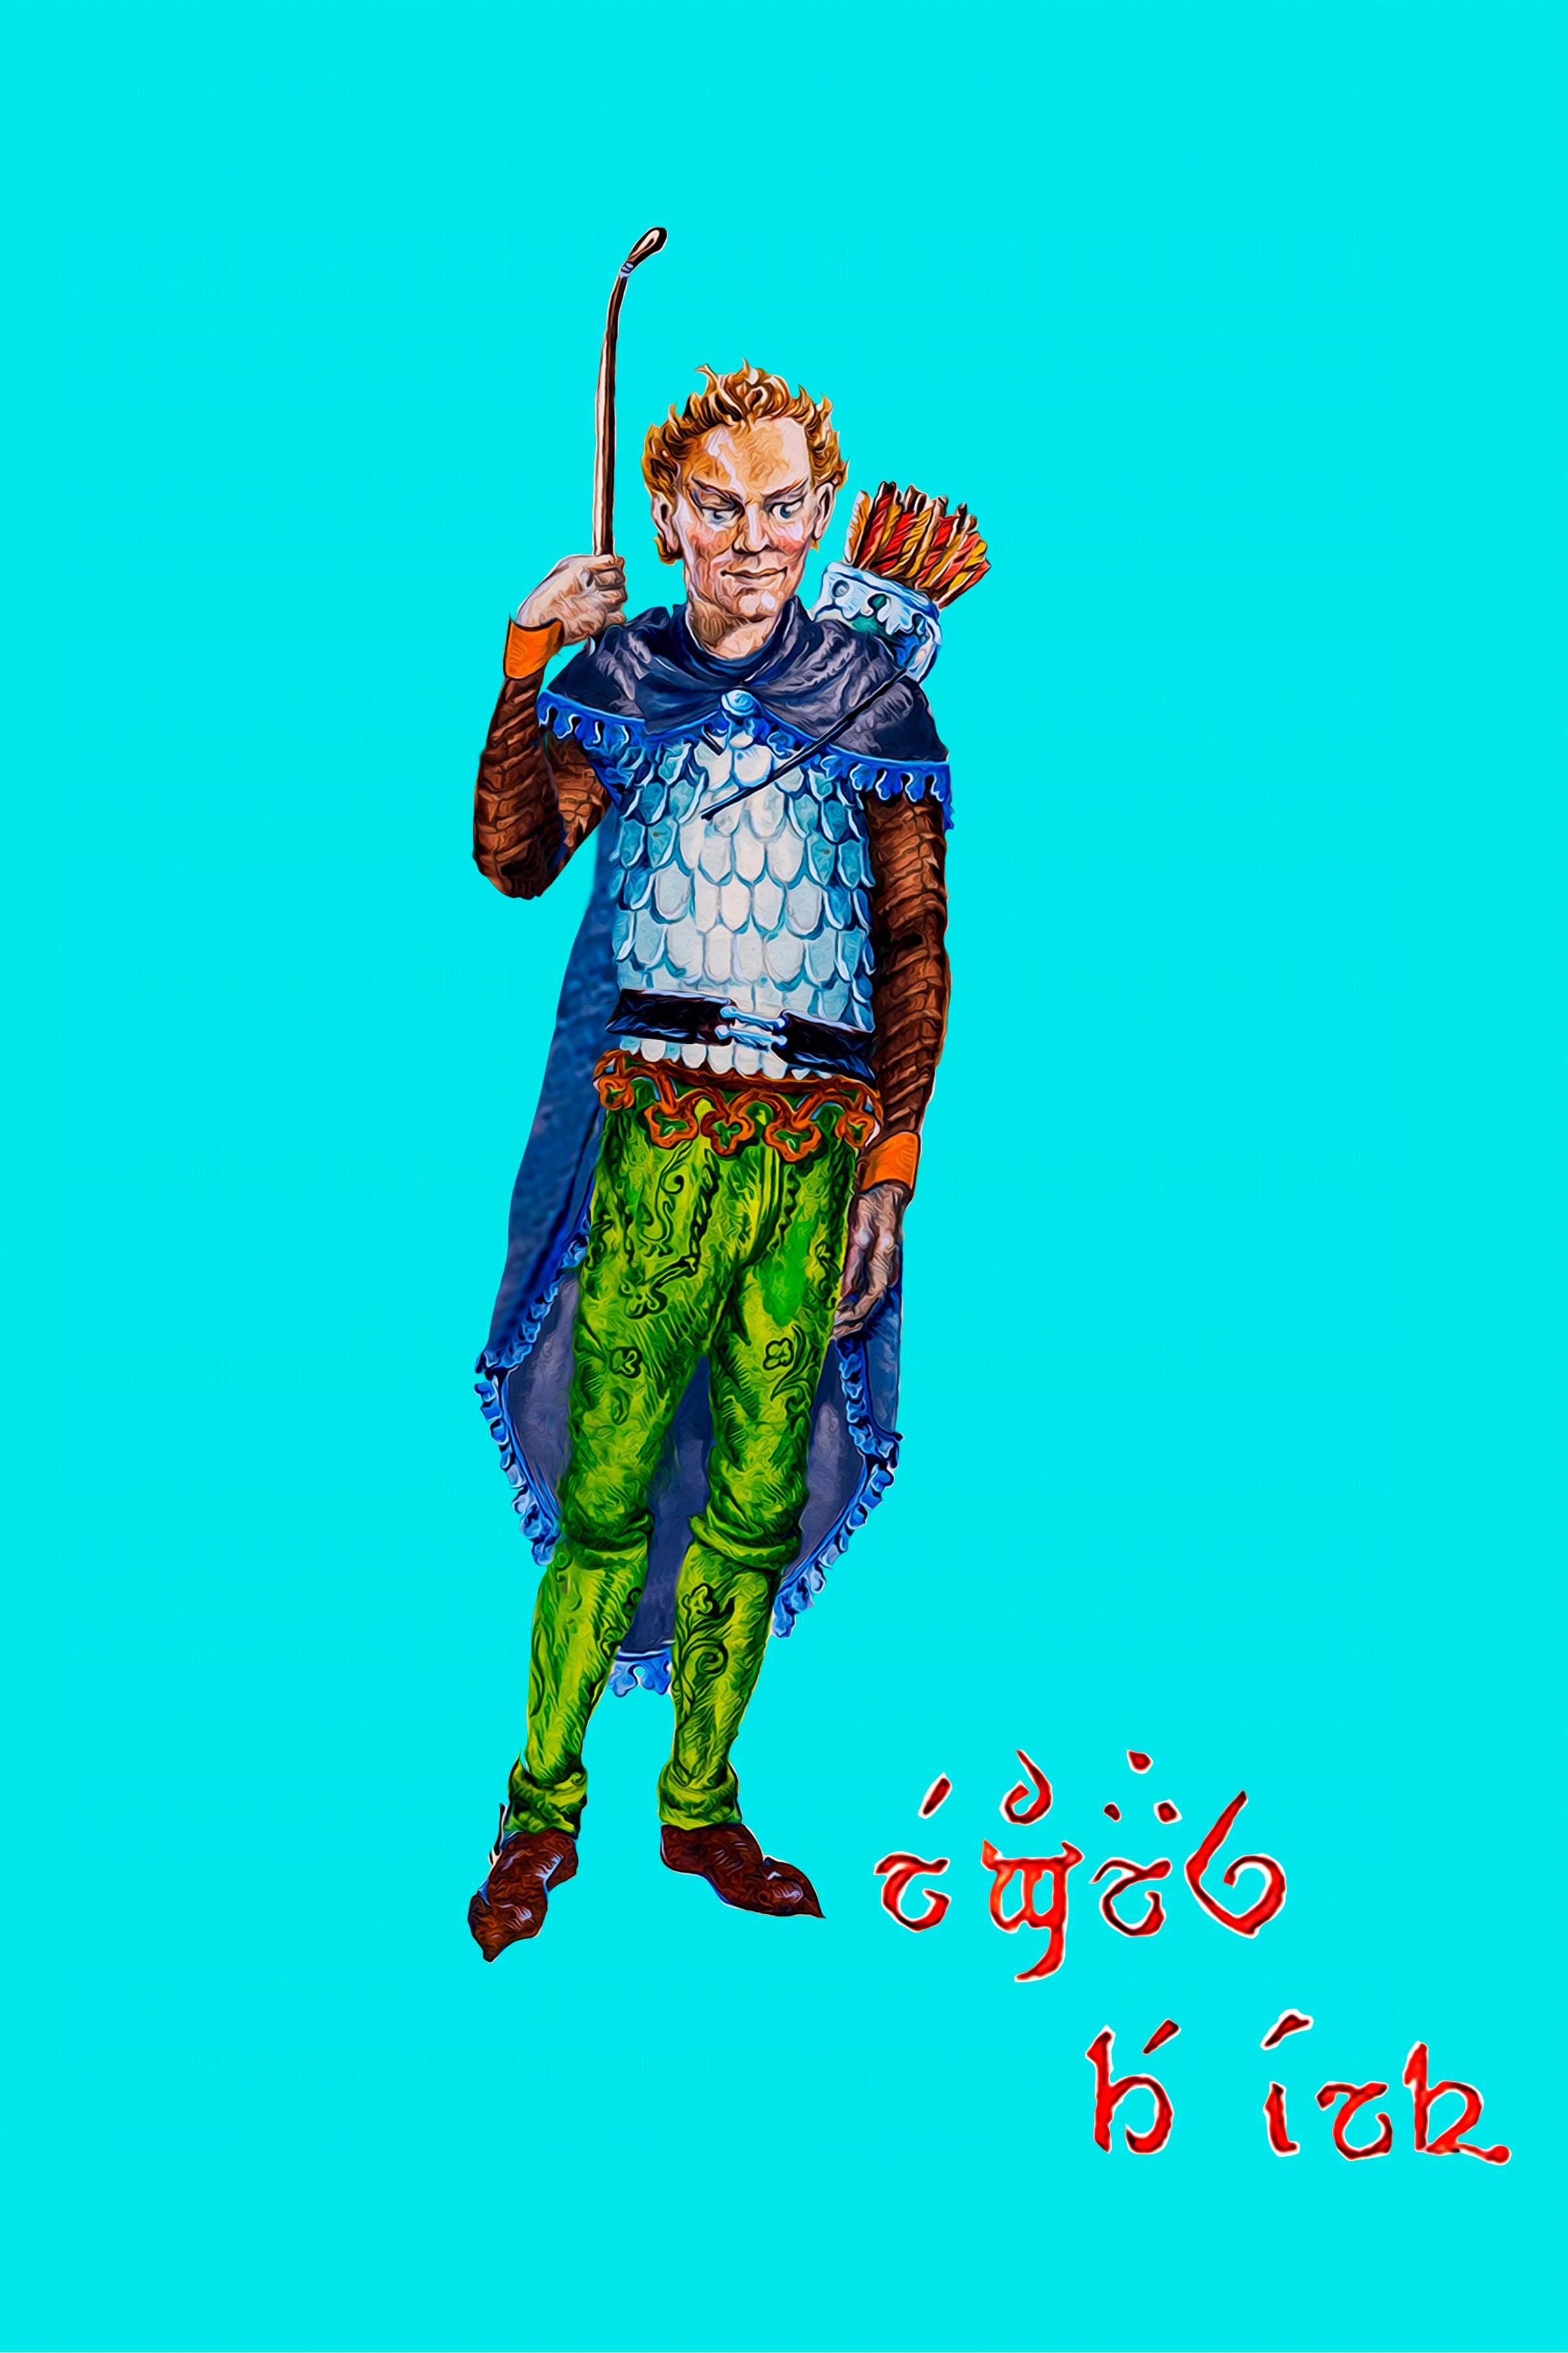 A Prince of the Elves with Bow and Arrows